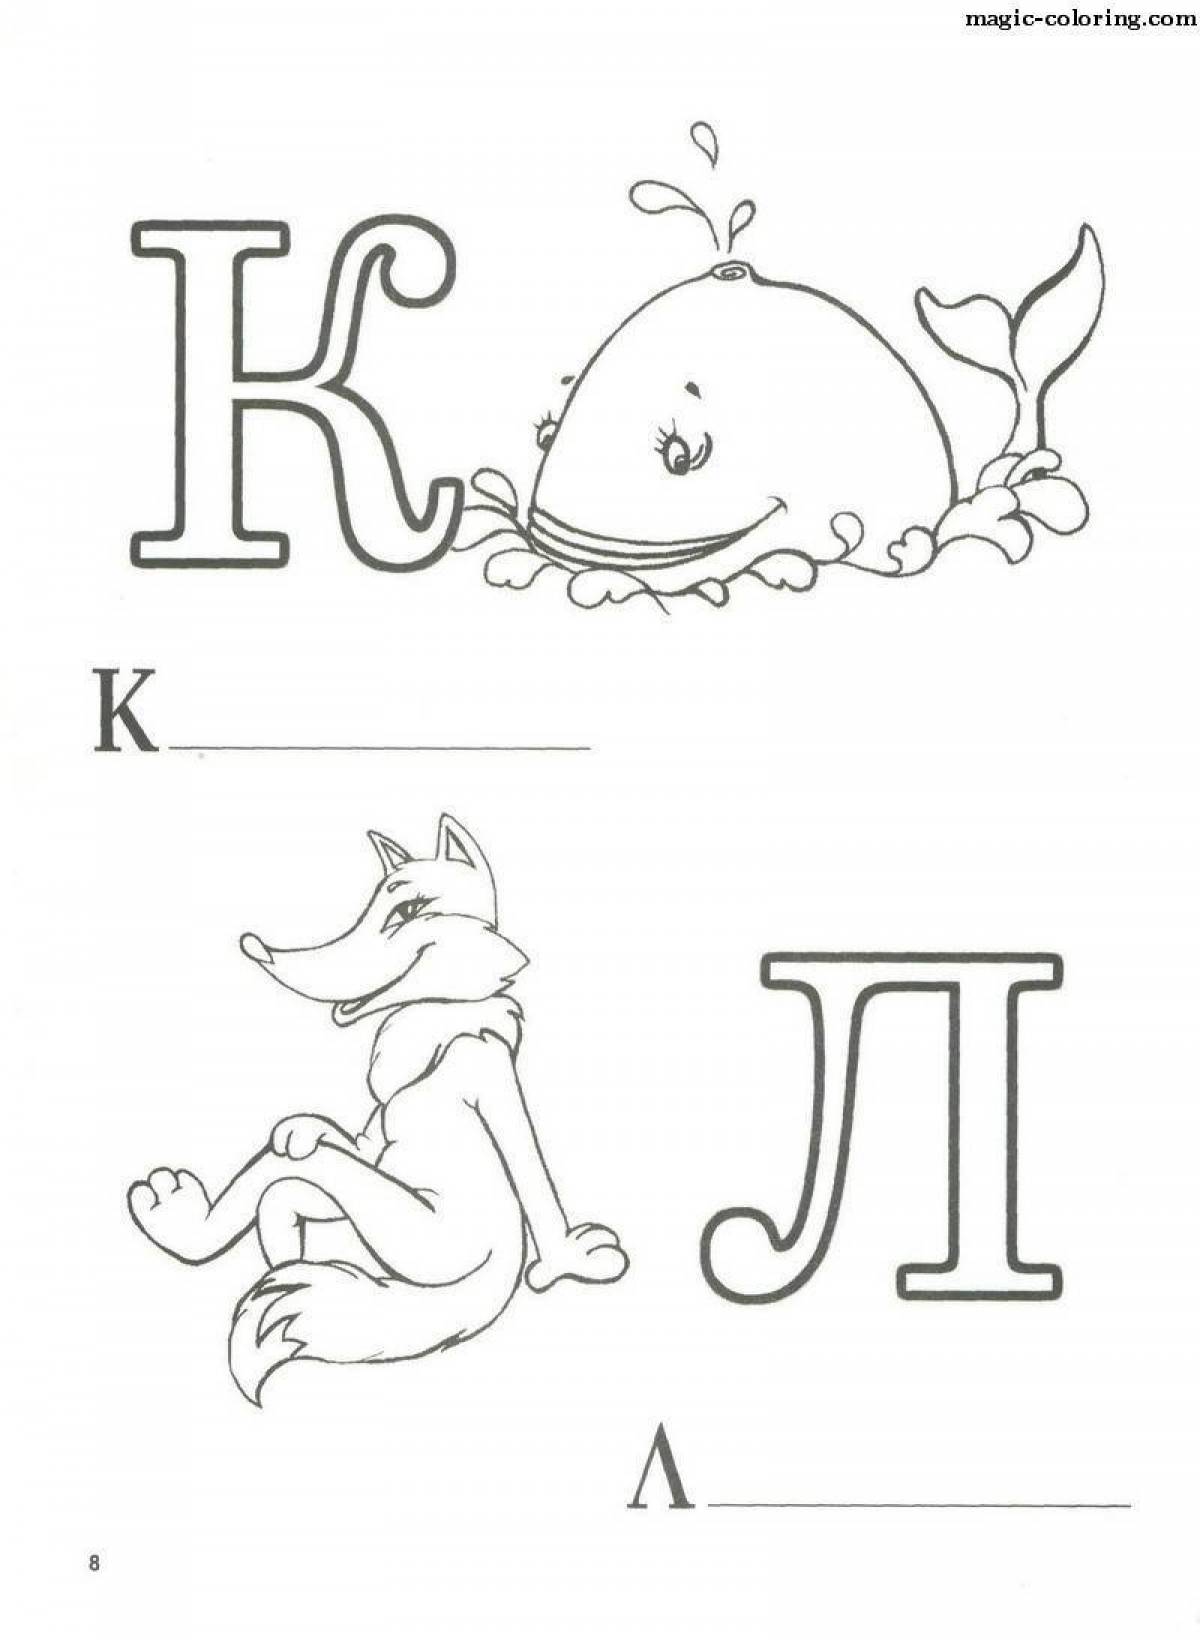 Coloring pages with letters for children